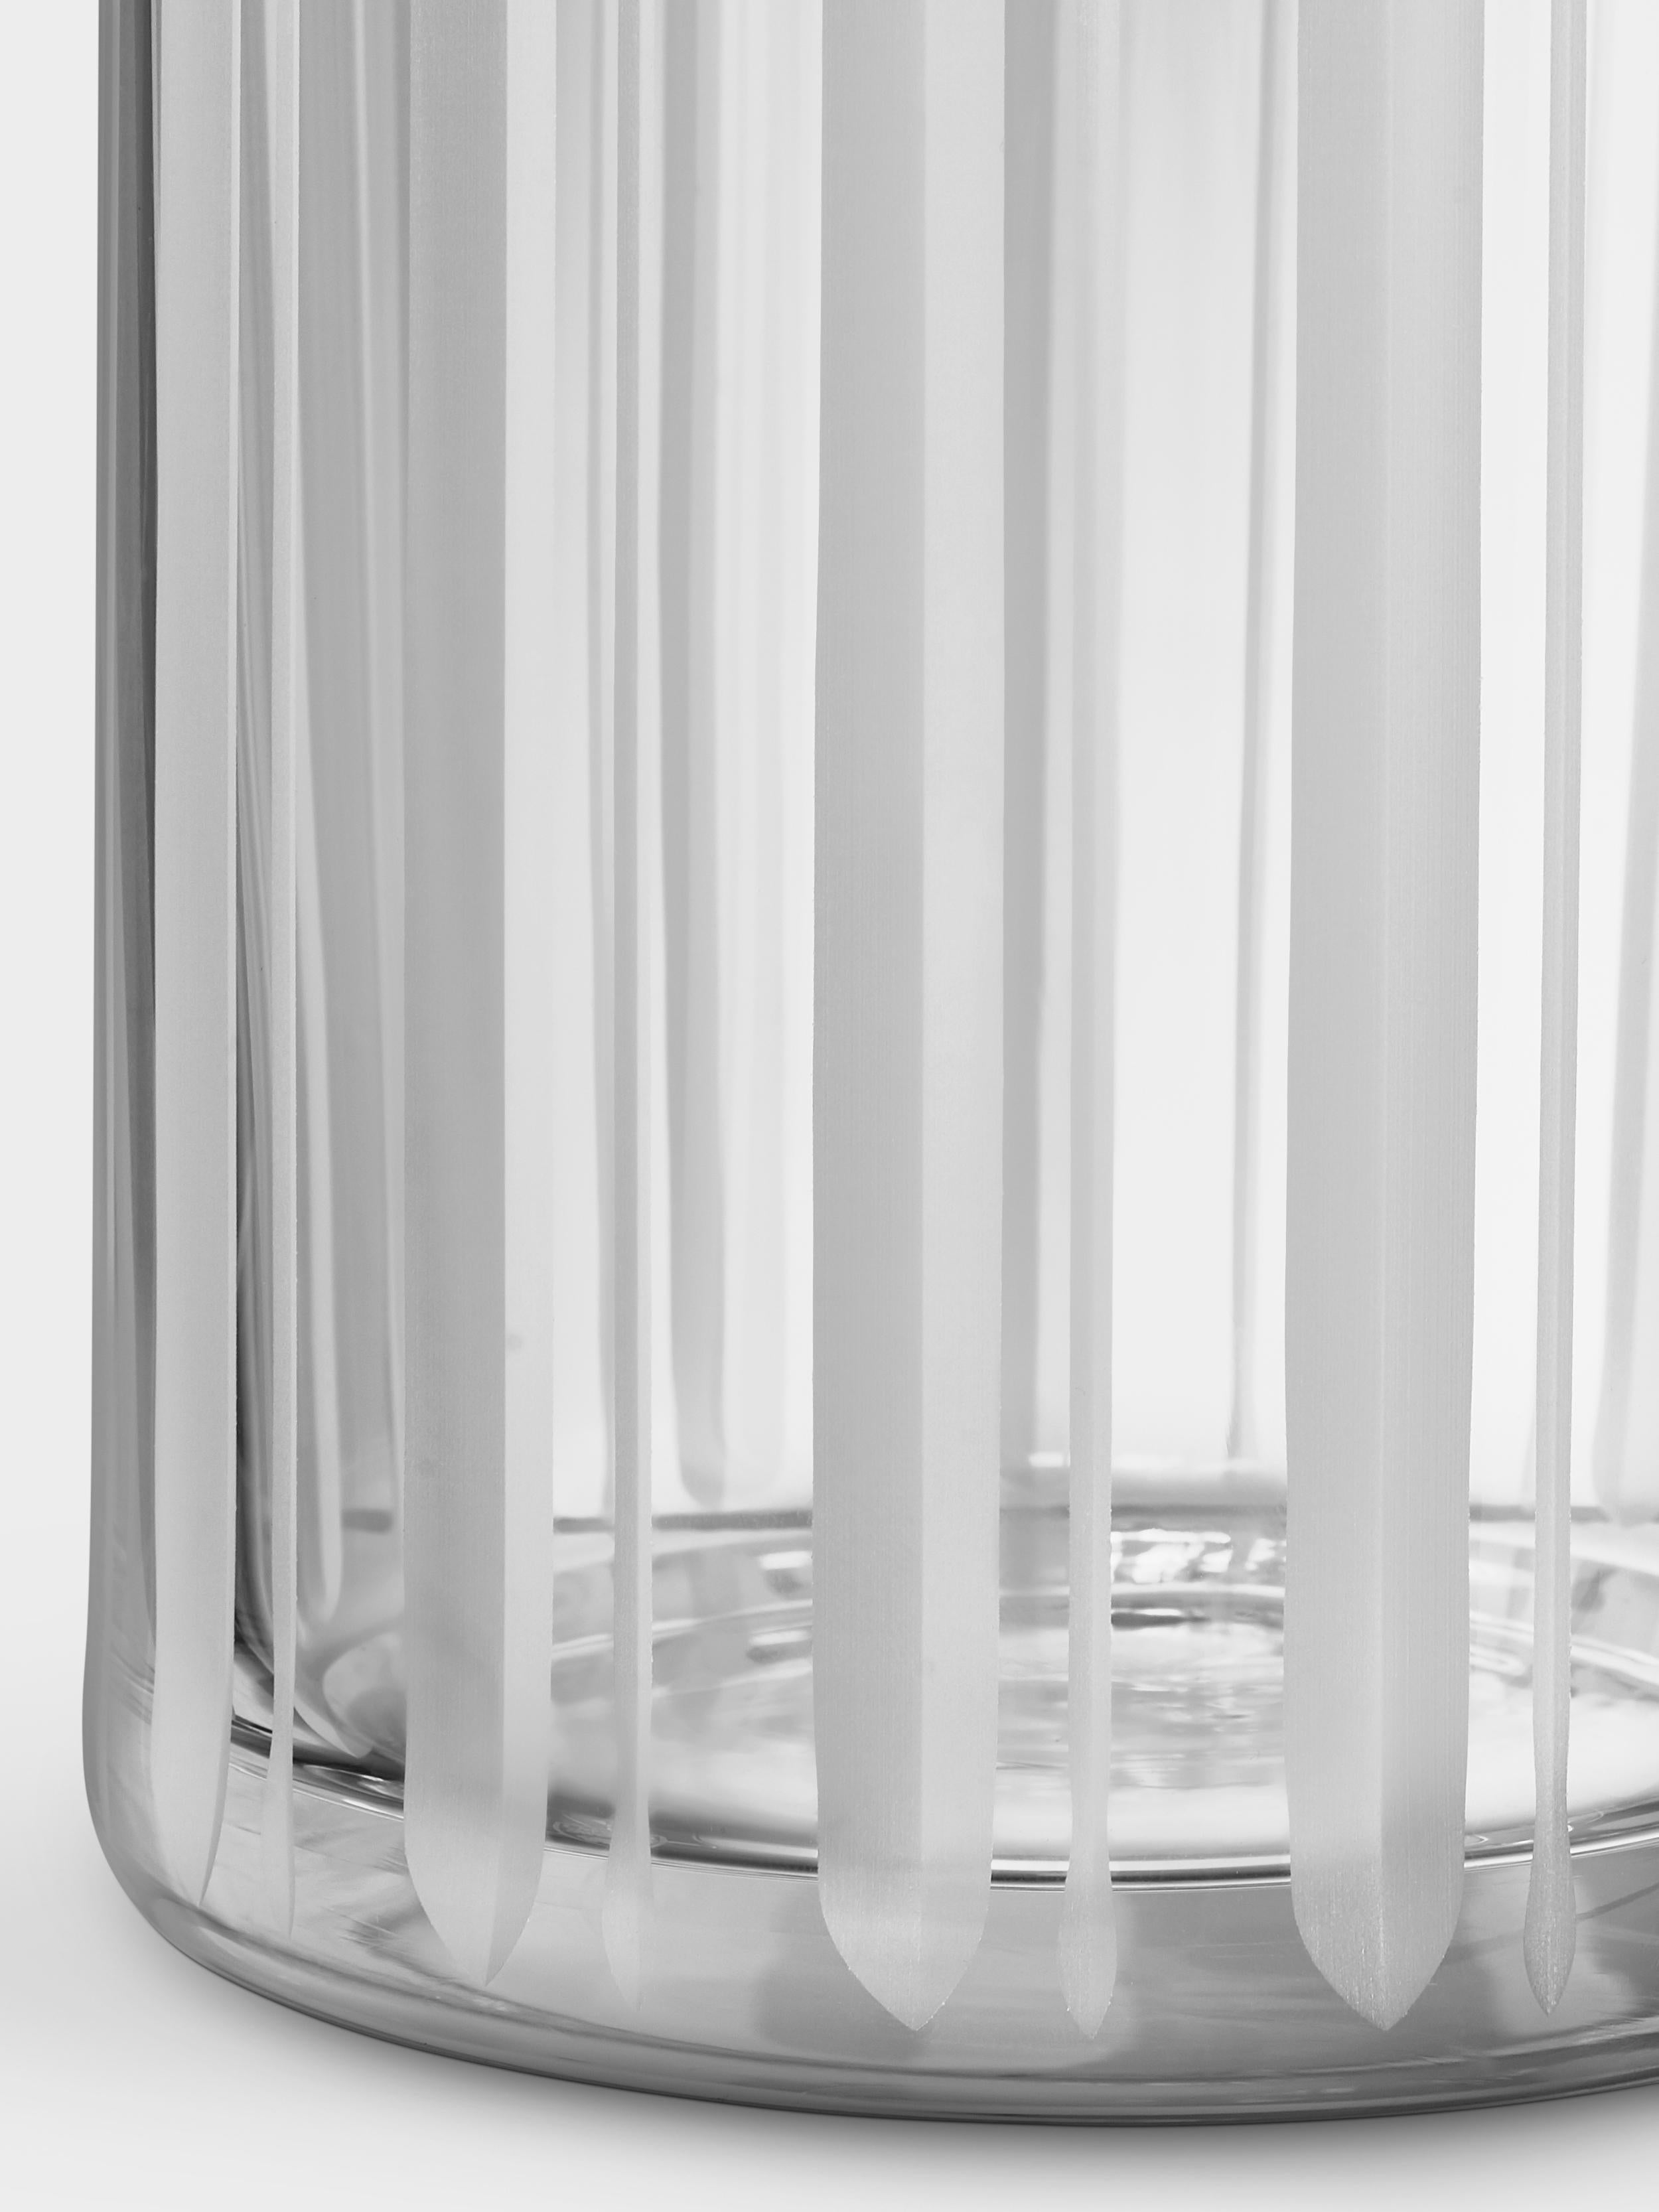 The tall cylinder vase with a stripe motif in the Cut In Number collection from Orrefors is ideal for long stem flowers. The satin finished cuts on the vase beautifully emphasize the transparency of the clear crystal. Designed by Ingegerd Råman.
